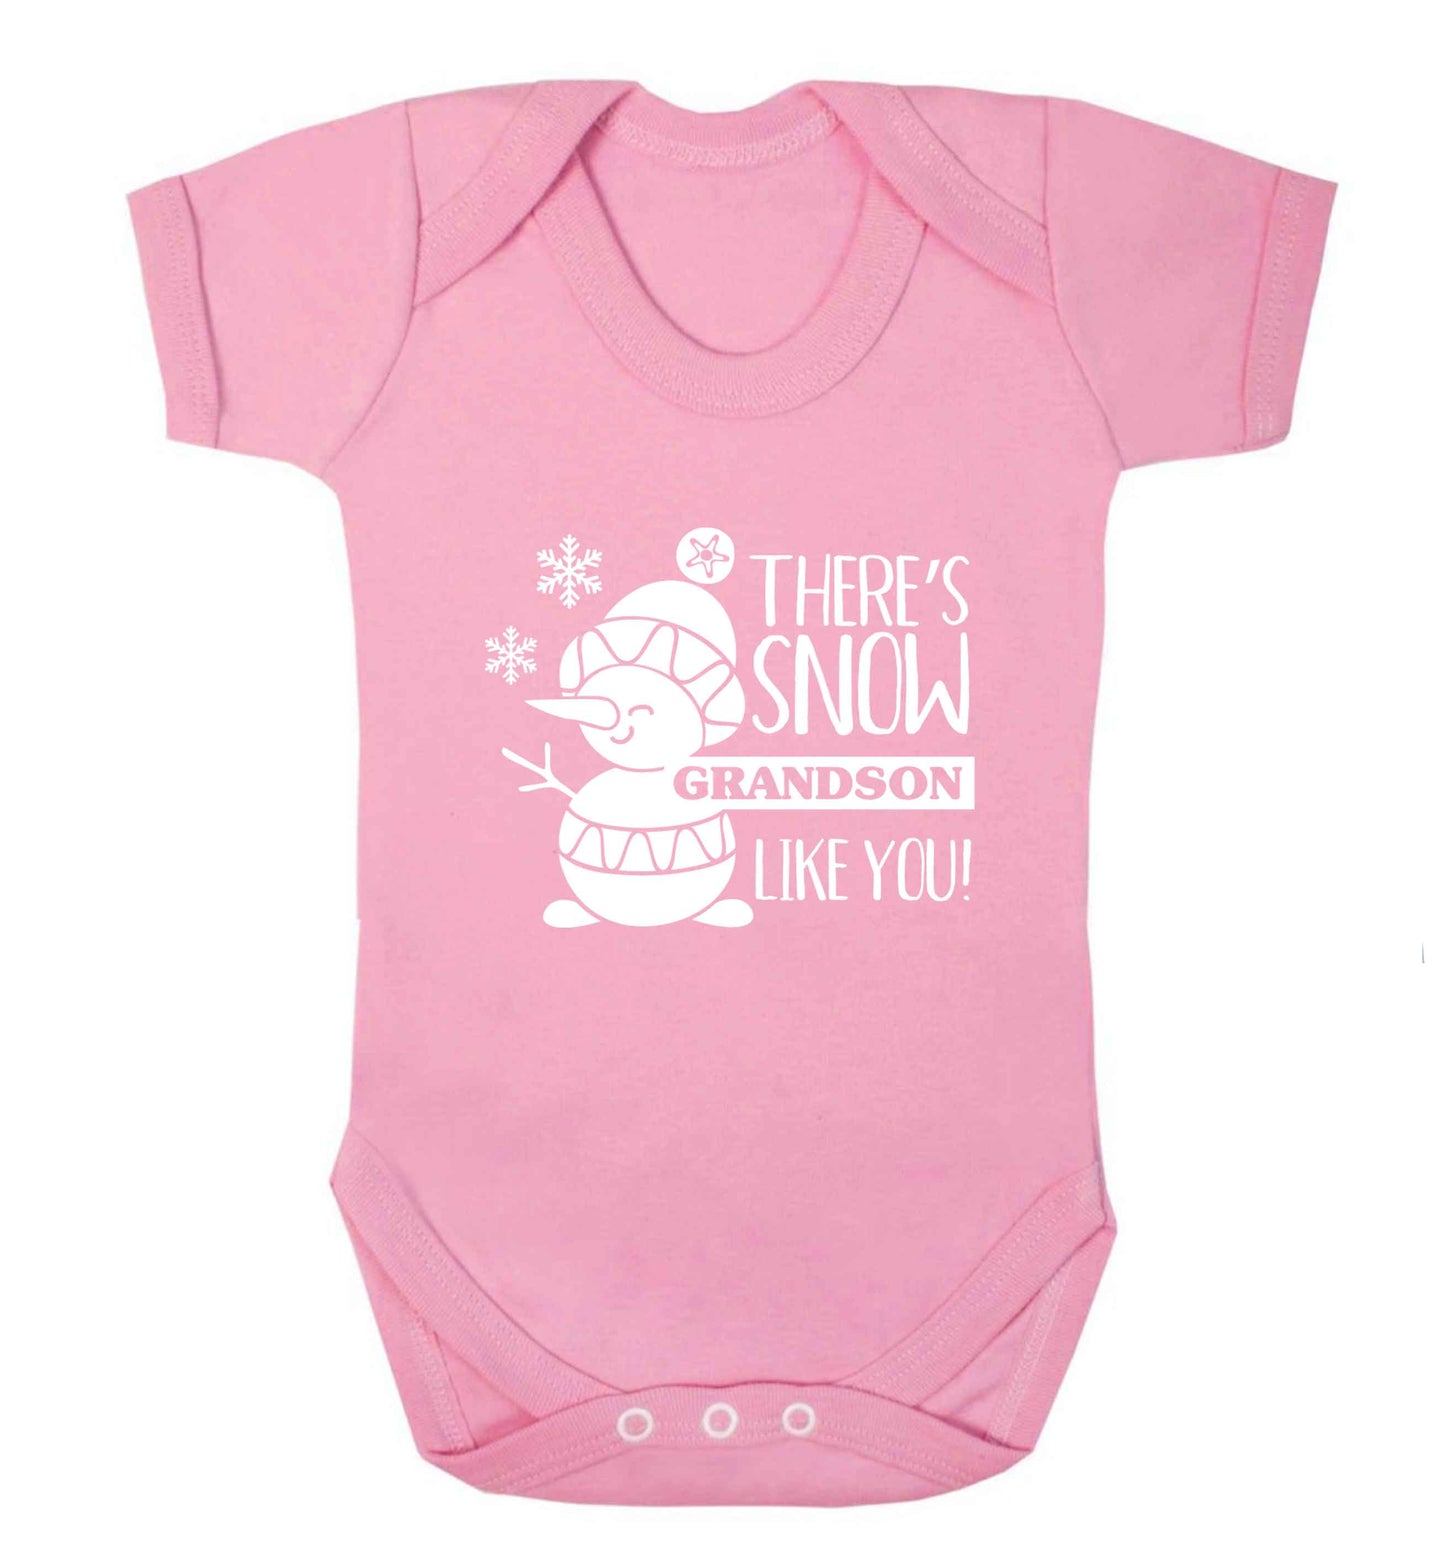 There's snow grandson like you baby vest pale pink 18-24 months